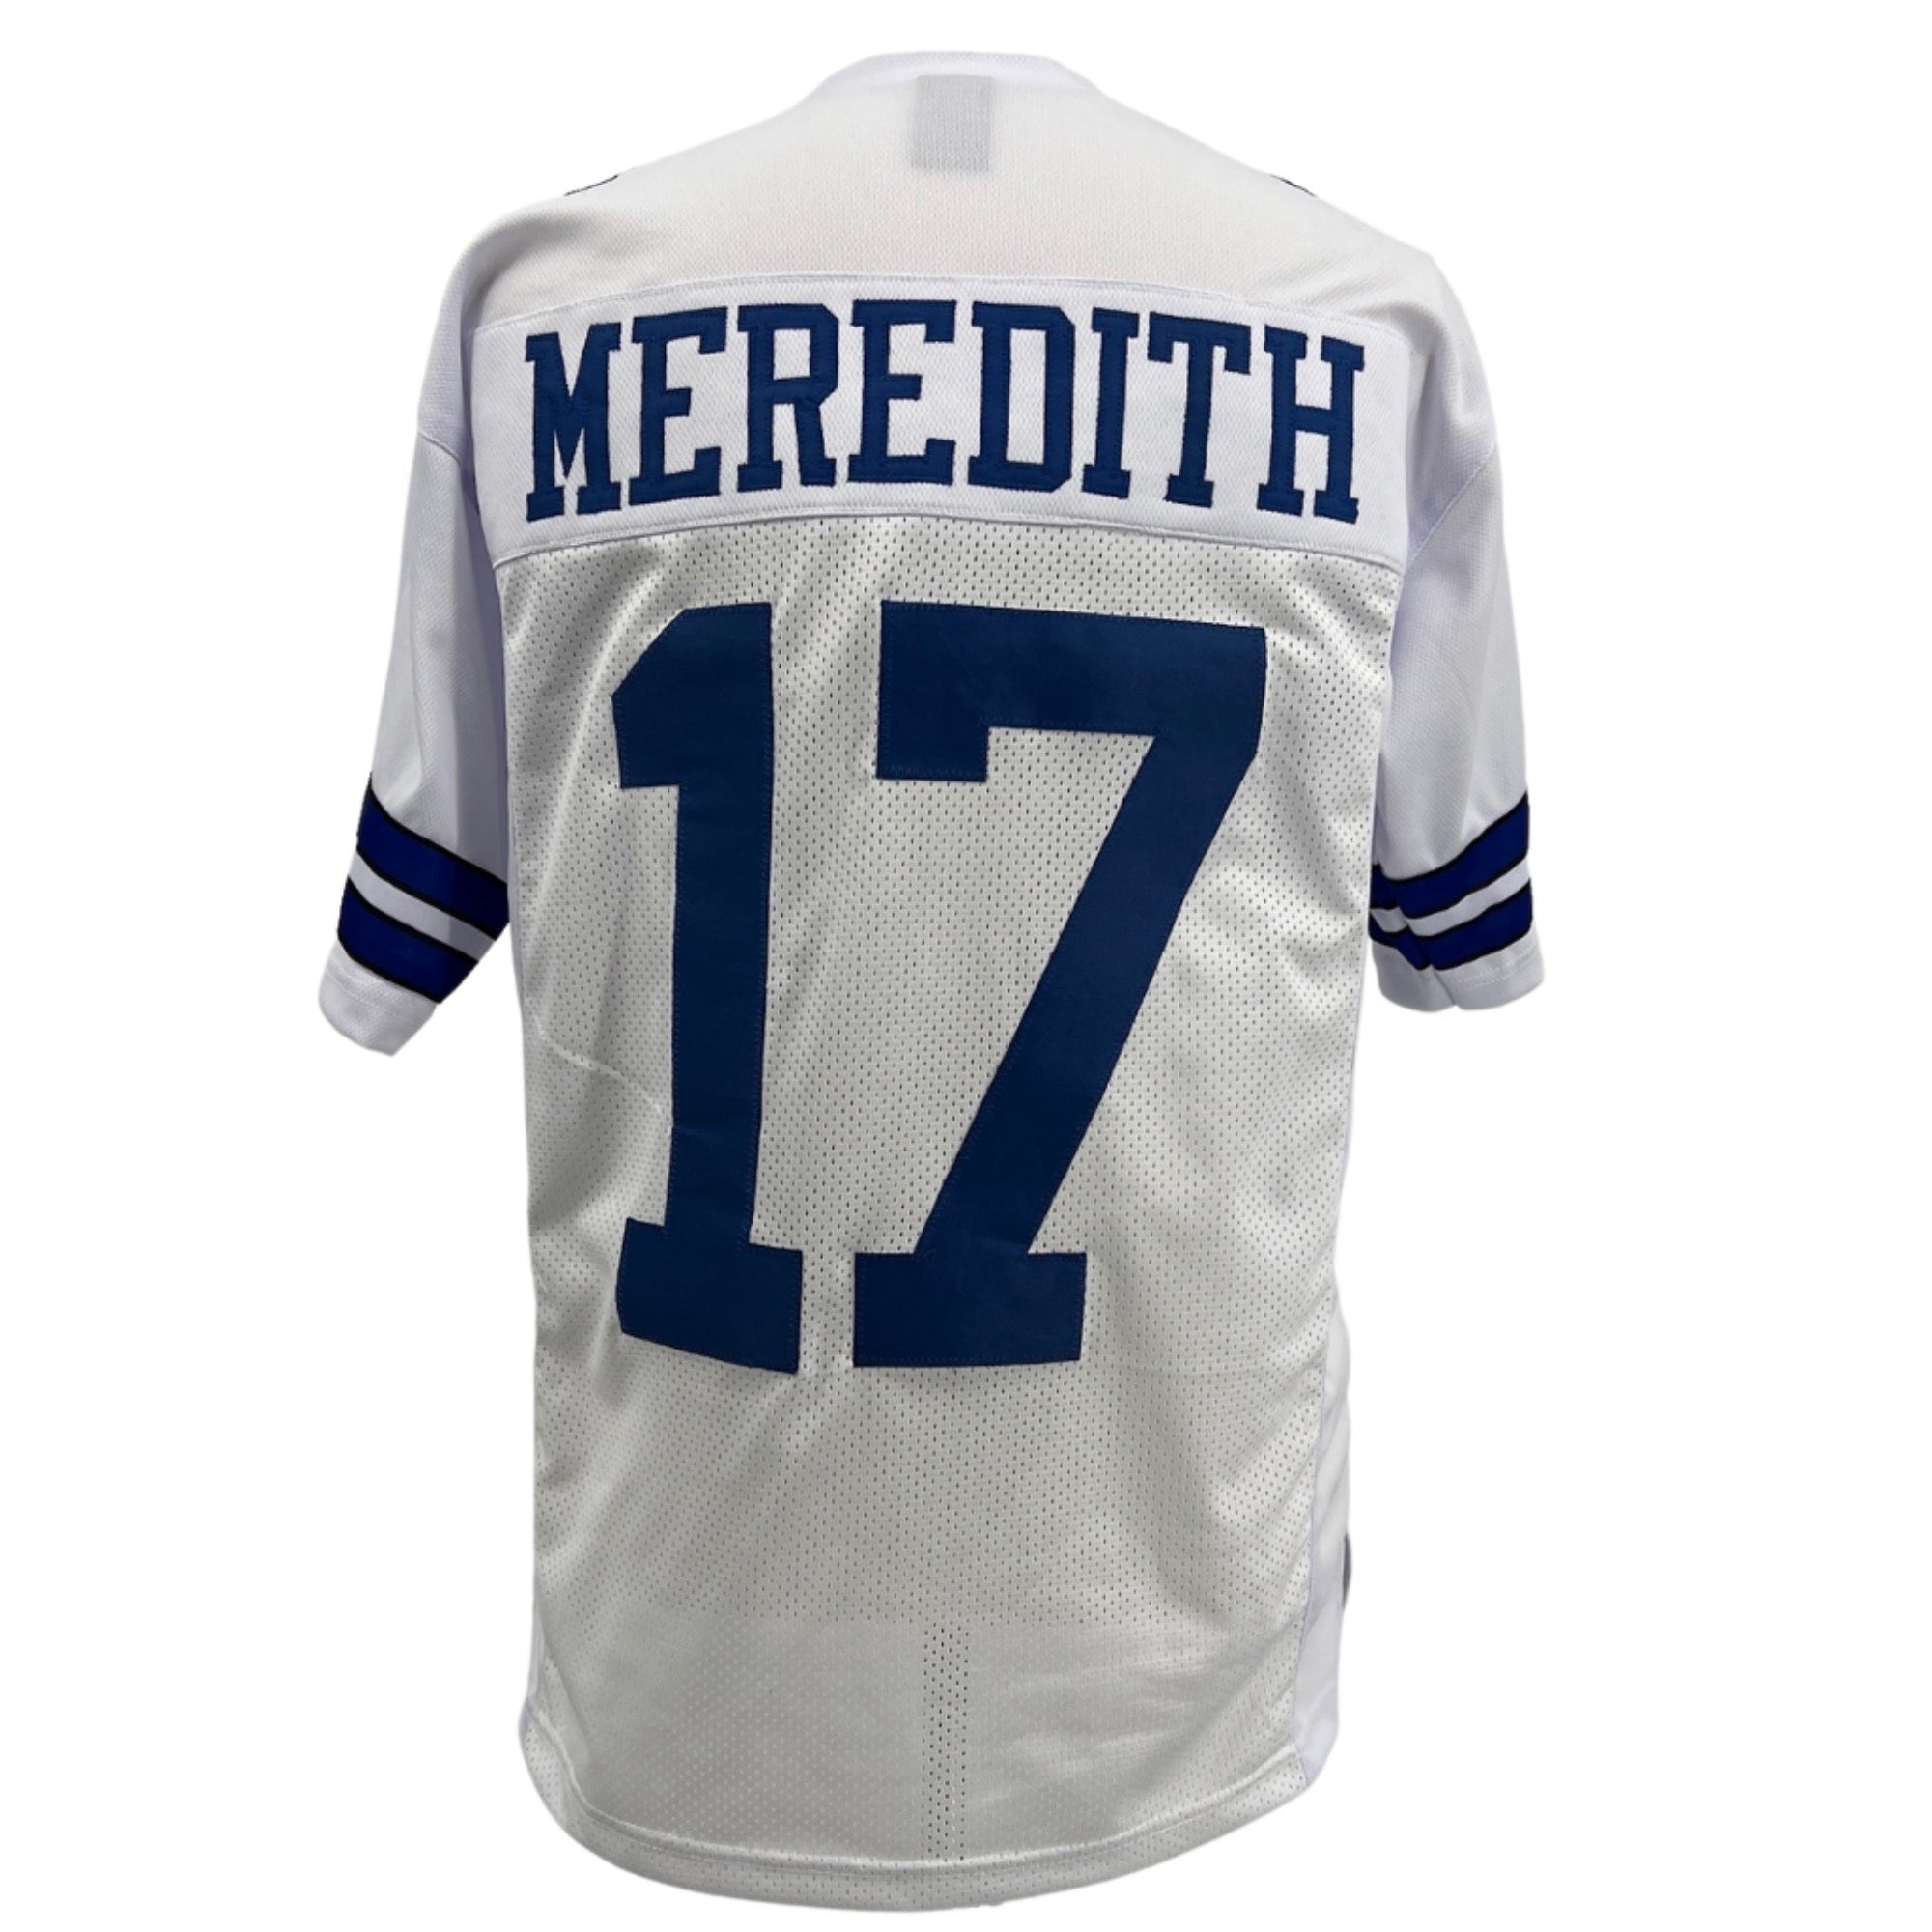 DON MEREDITH Dallas Cowboys WHITE Jersey M-5XL Unsigned Custom Sewn Stitched